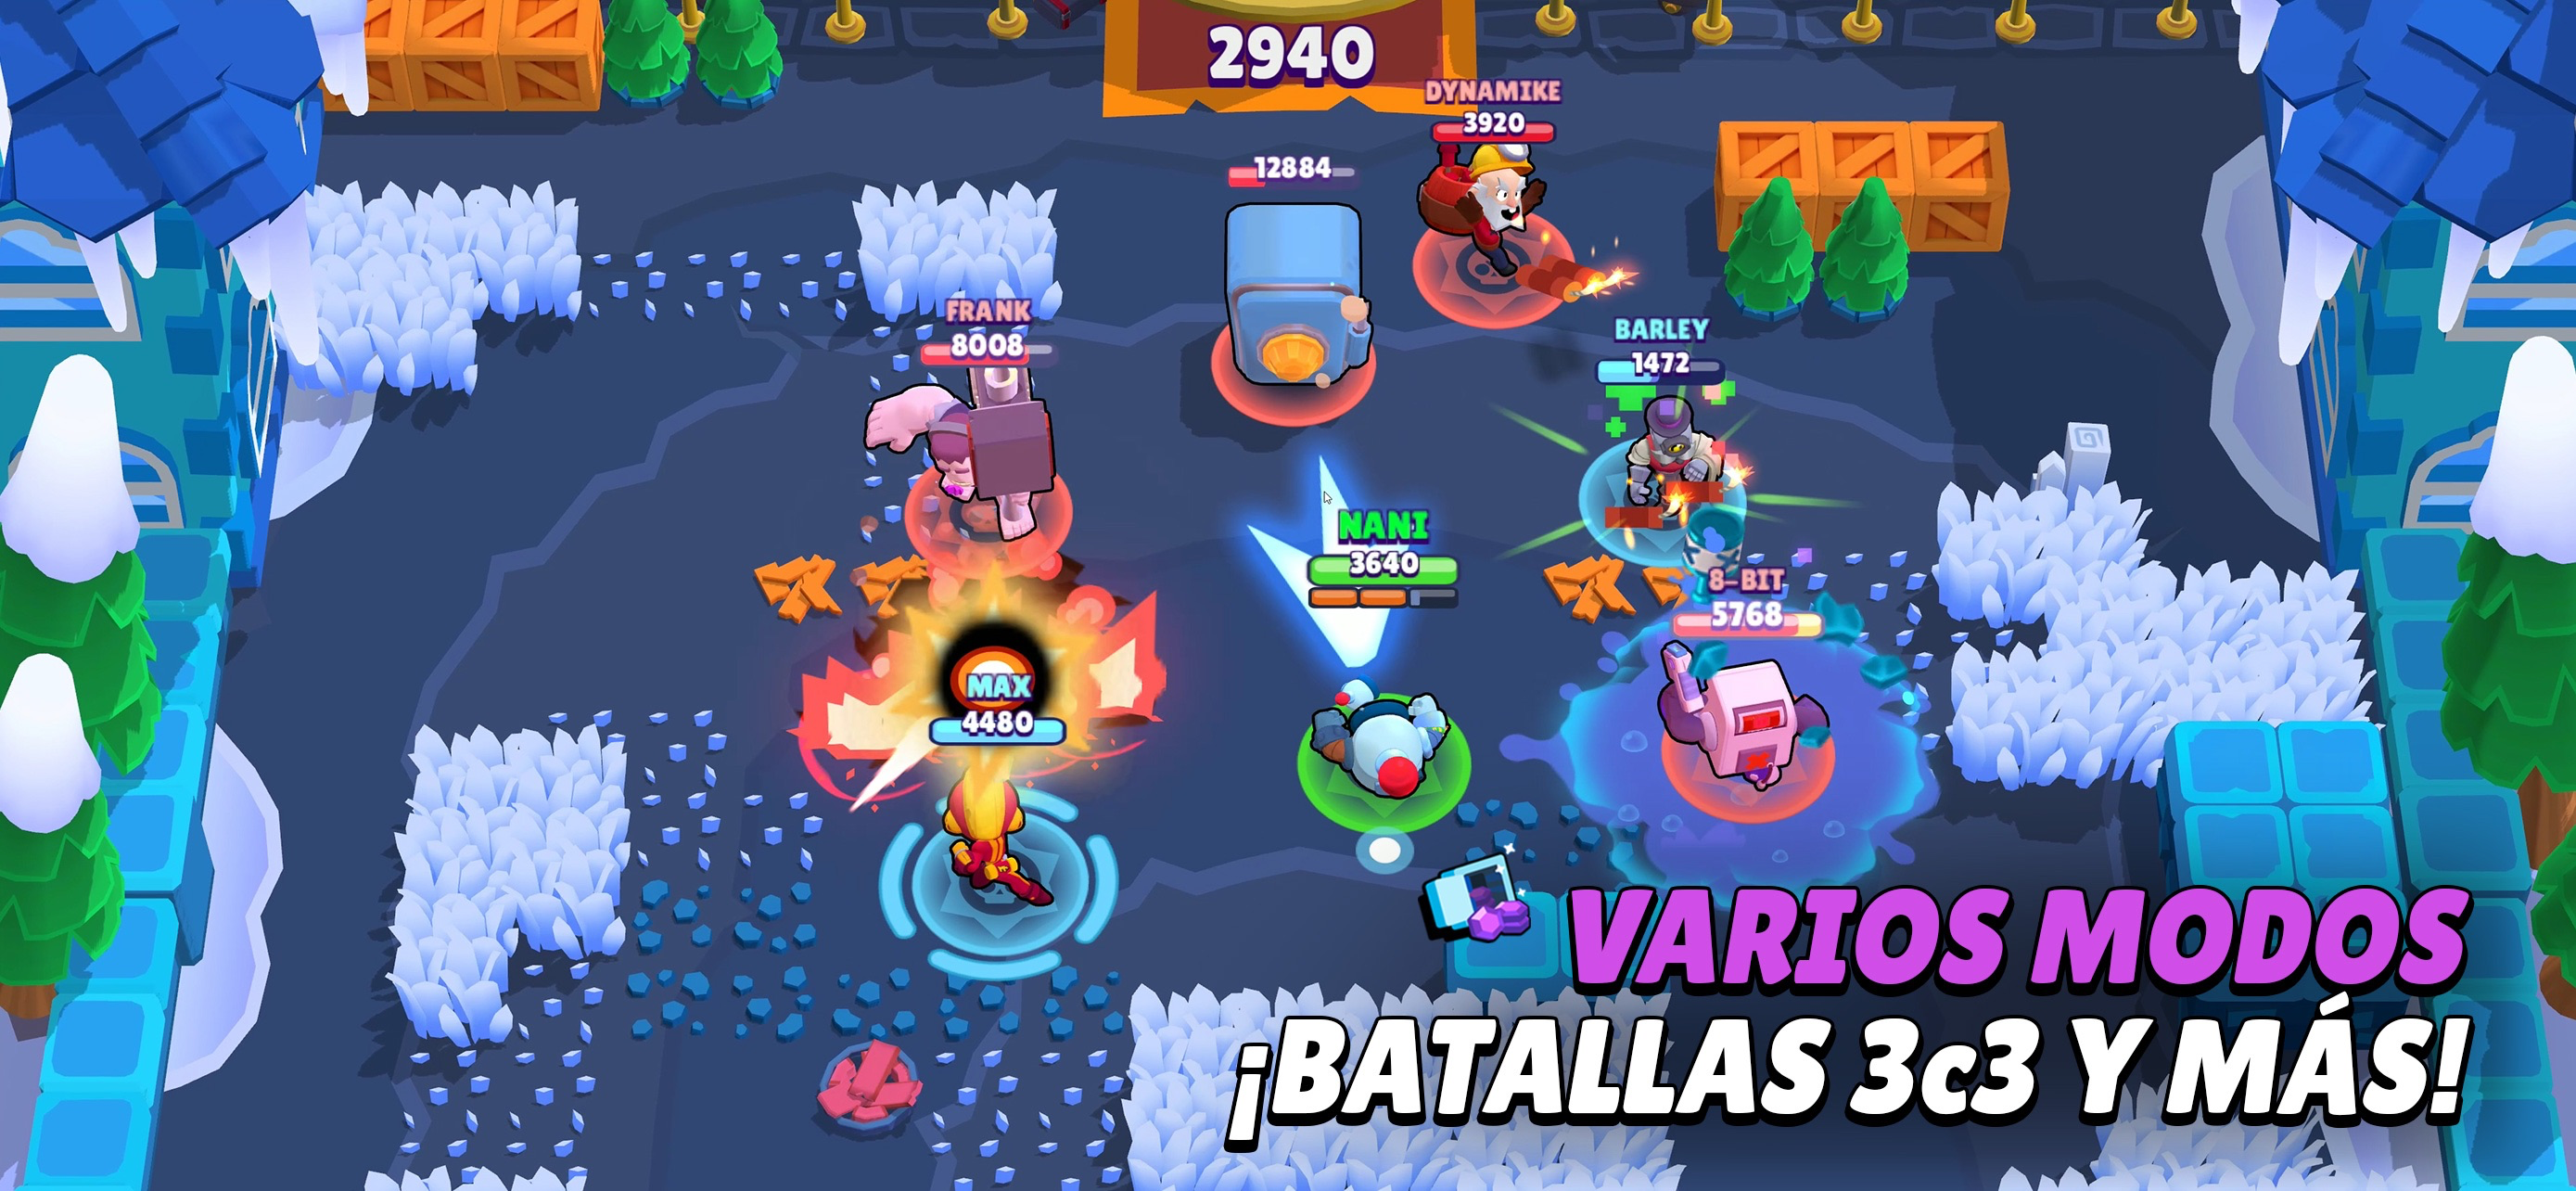 Brawl Stars Overview Apple App Store Mexico - hadta que nivel se puede mejoear brawl stars